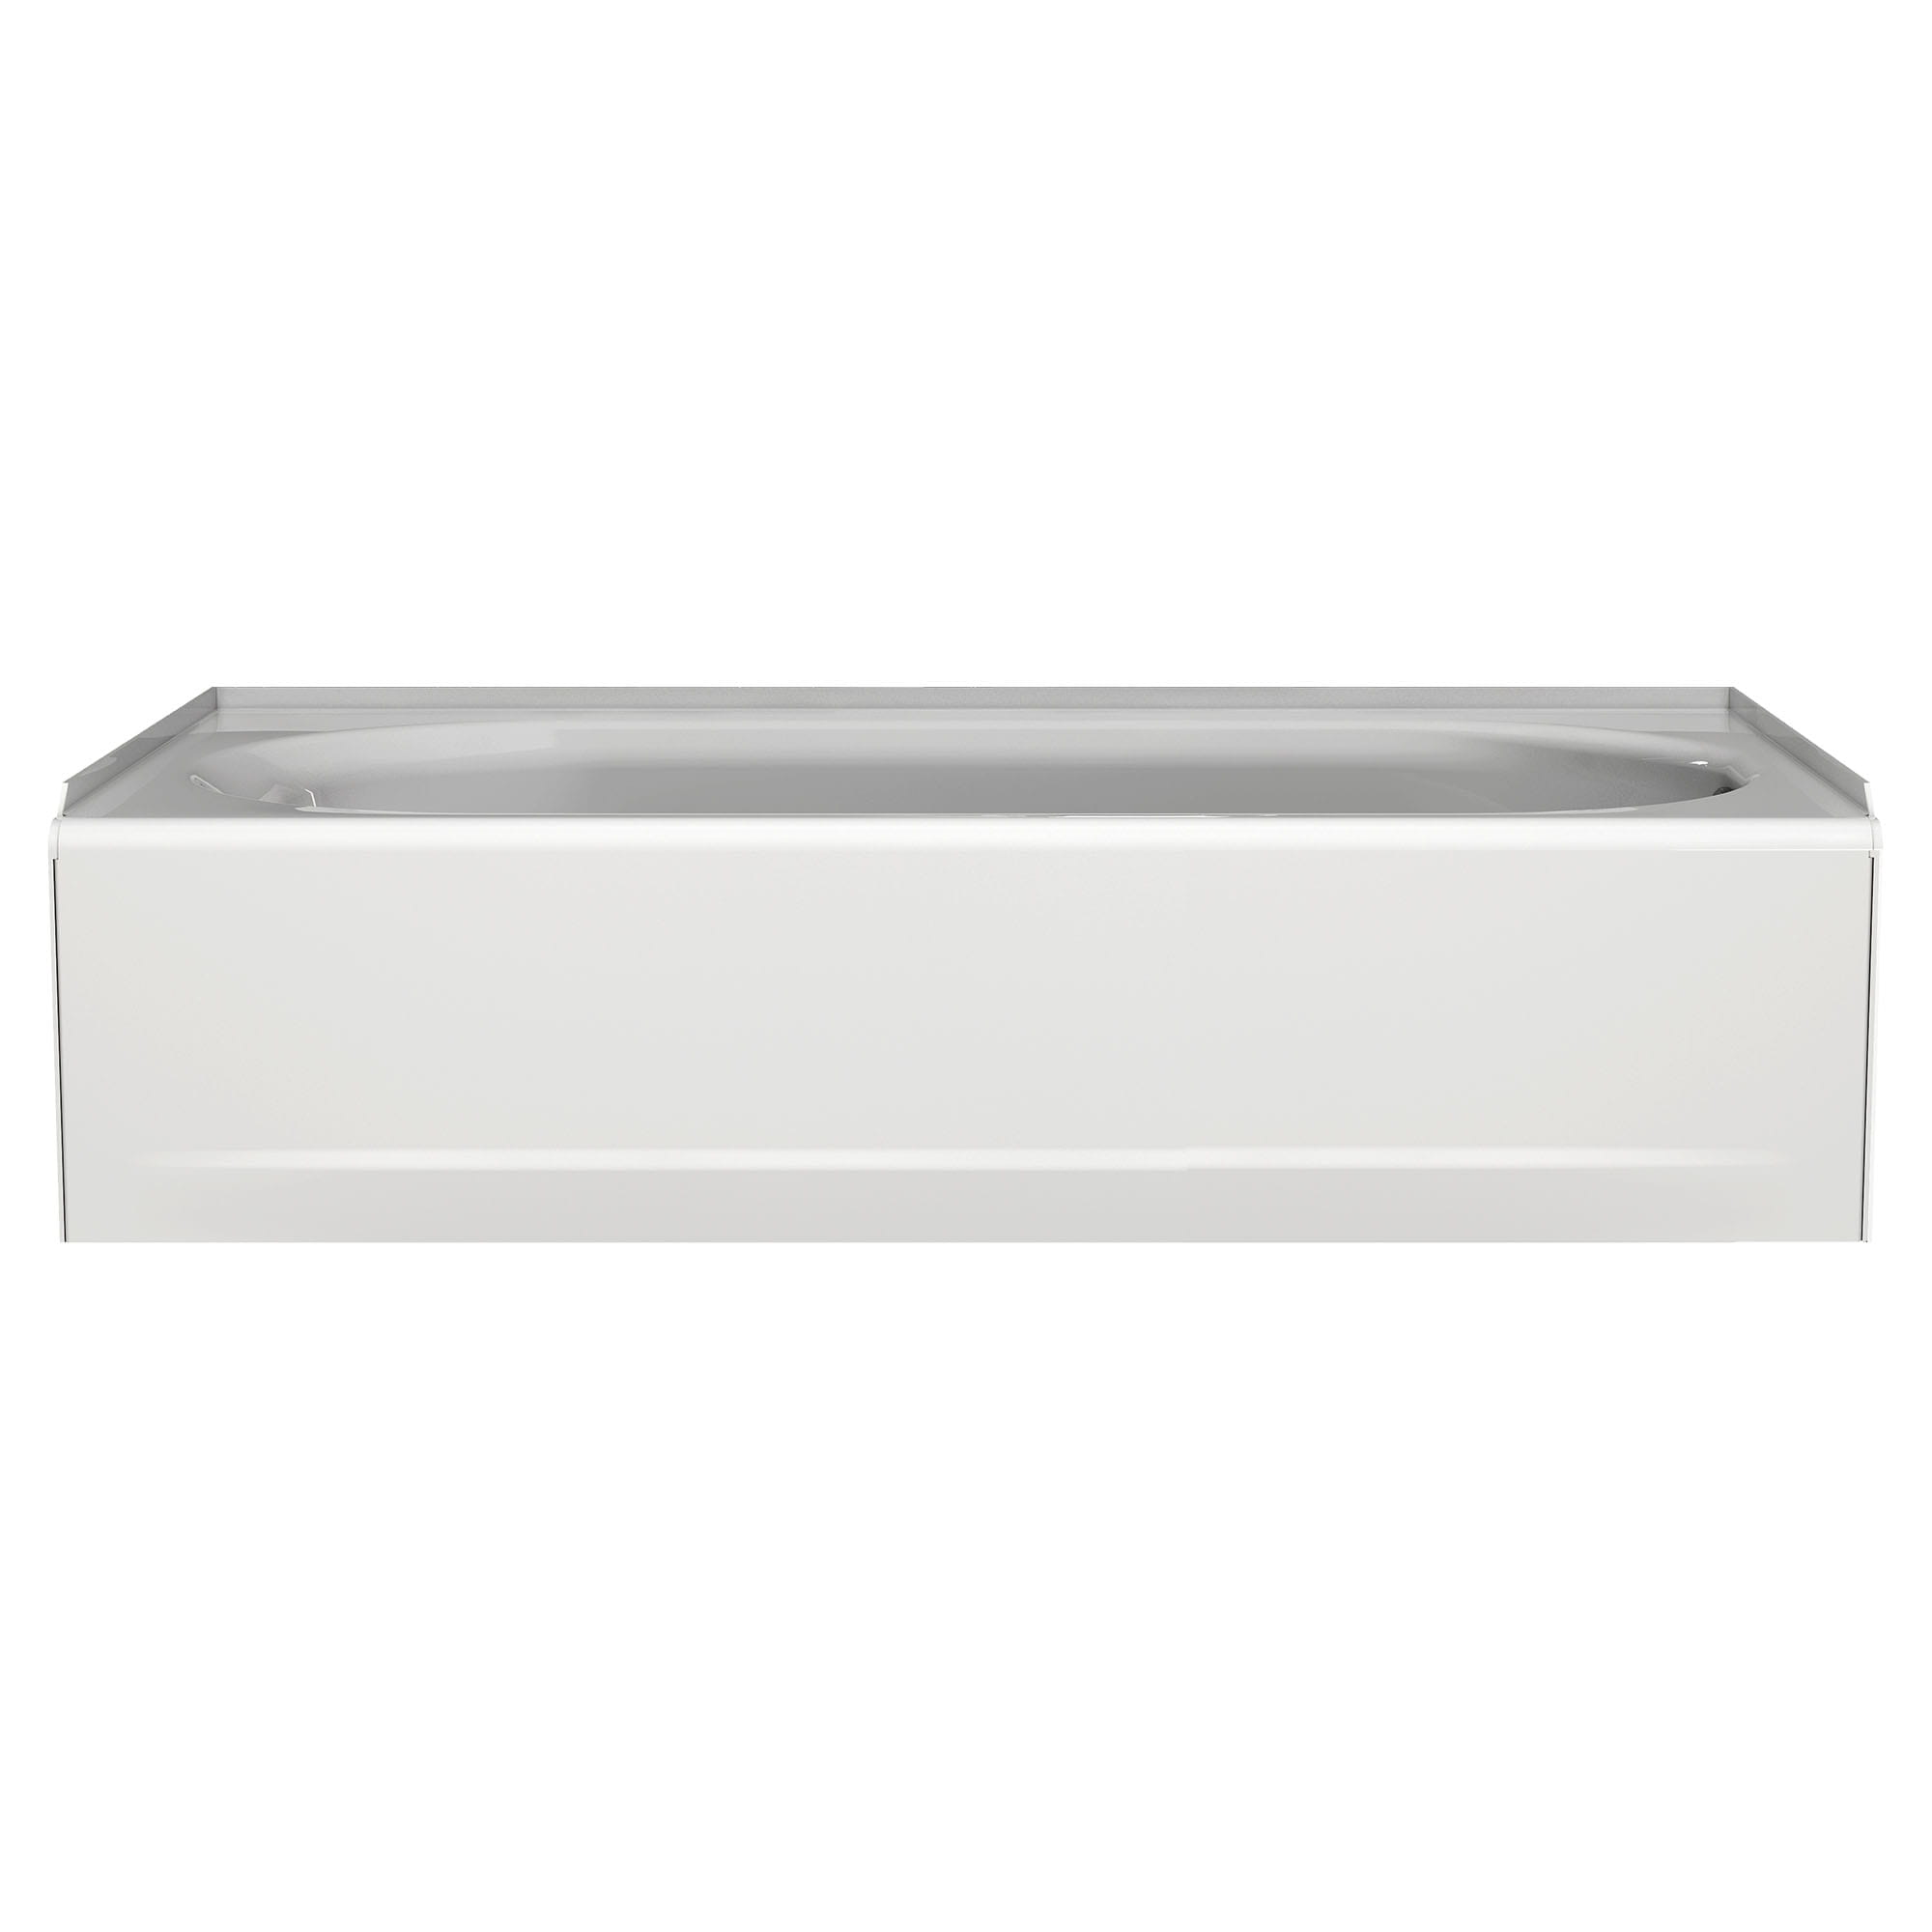 Princeton® Americast® 60 x 34-Inch Integral Apron Bathtub Above Floor Rough Left-Hand Outlet Luxury Ledge with Integral Drain